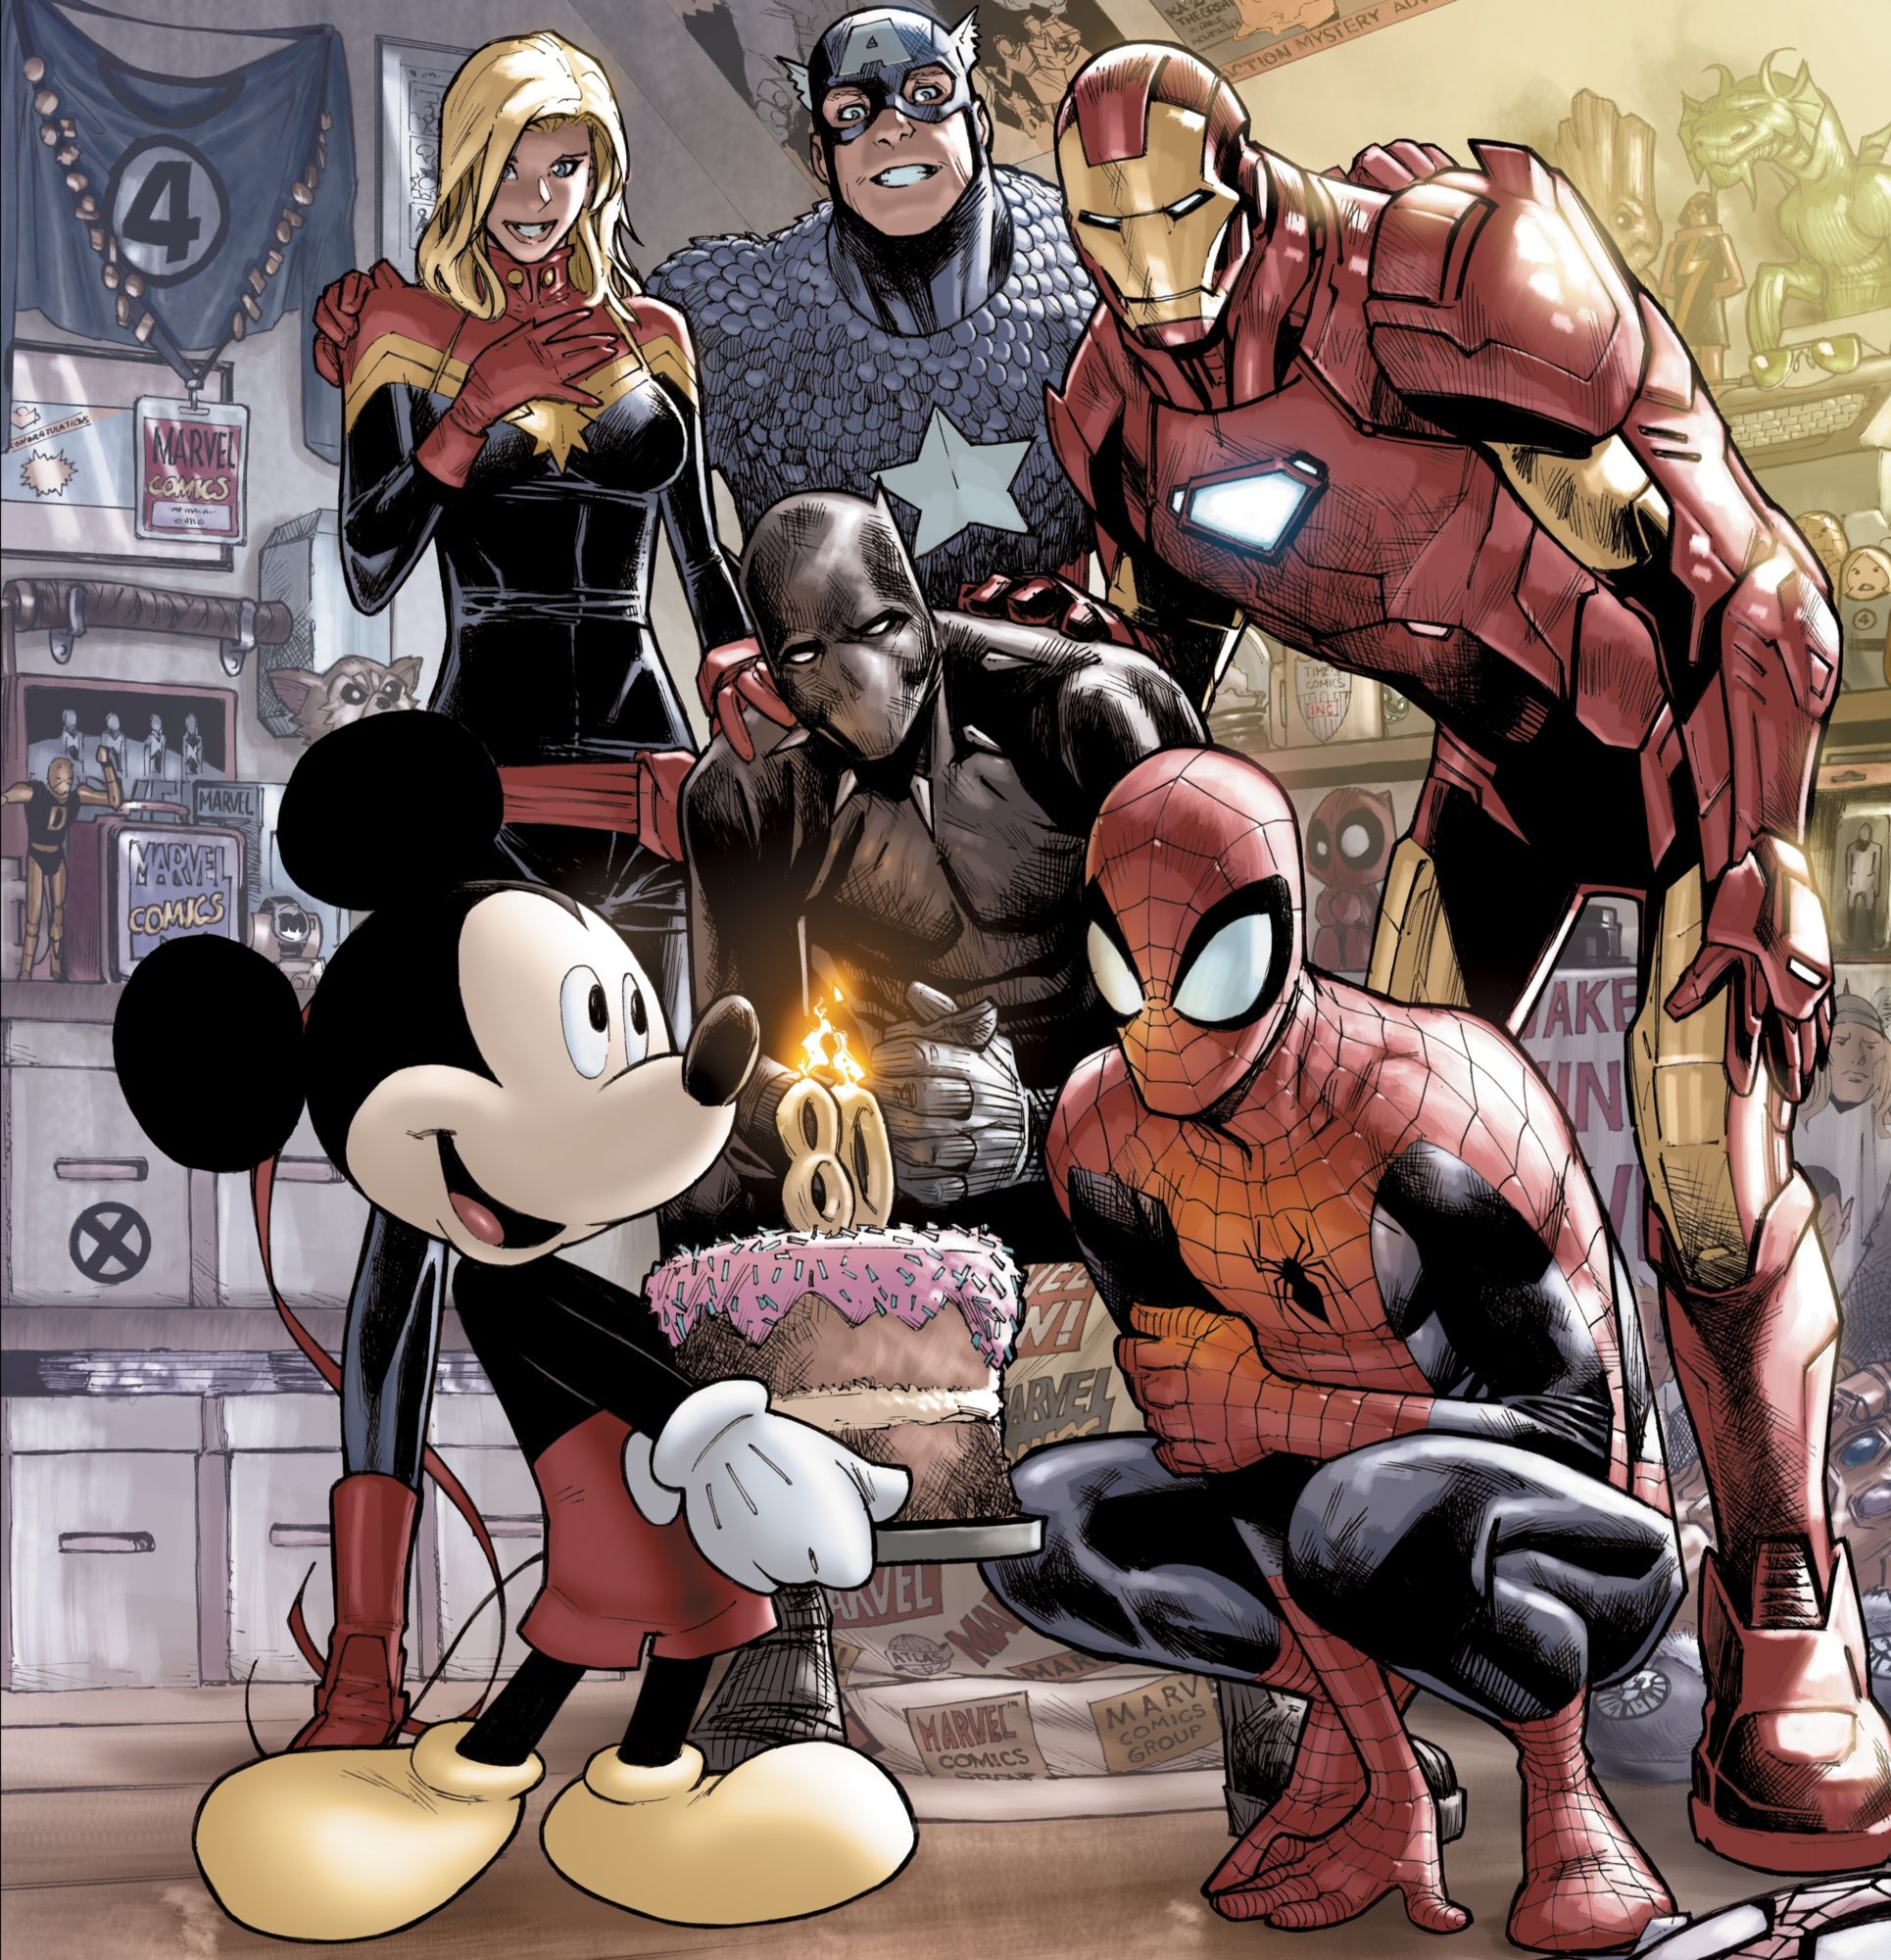 Marvel Comics #1000 to Be Published Early - But Only at D23